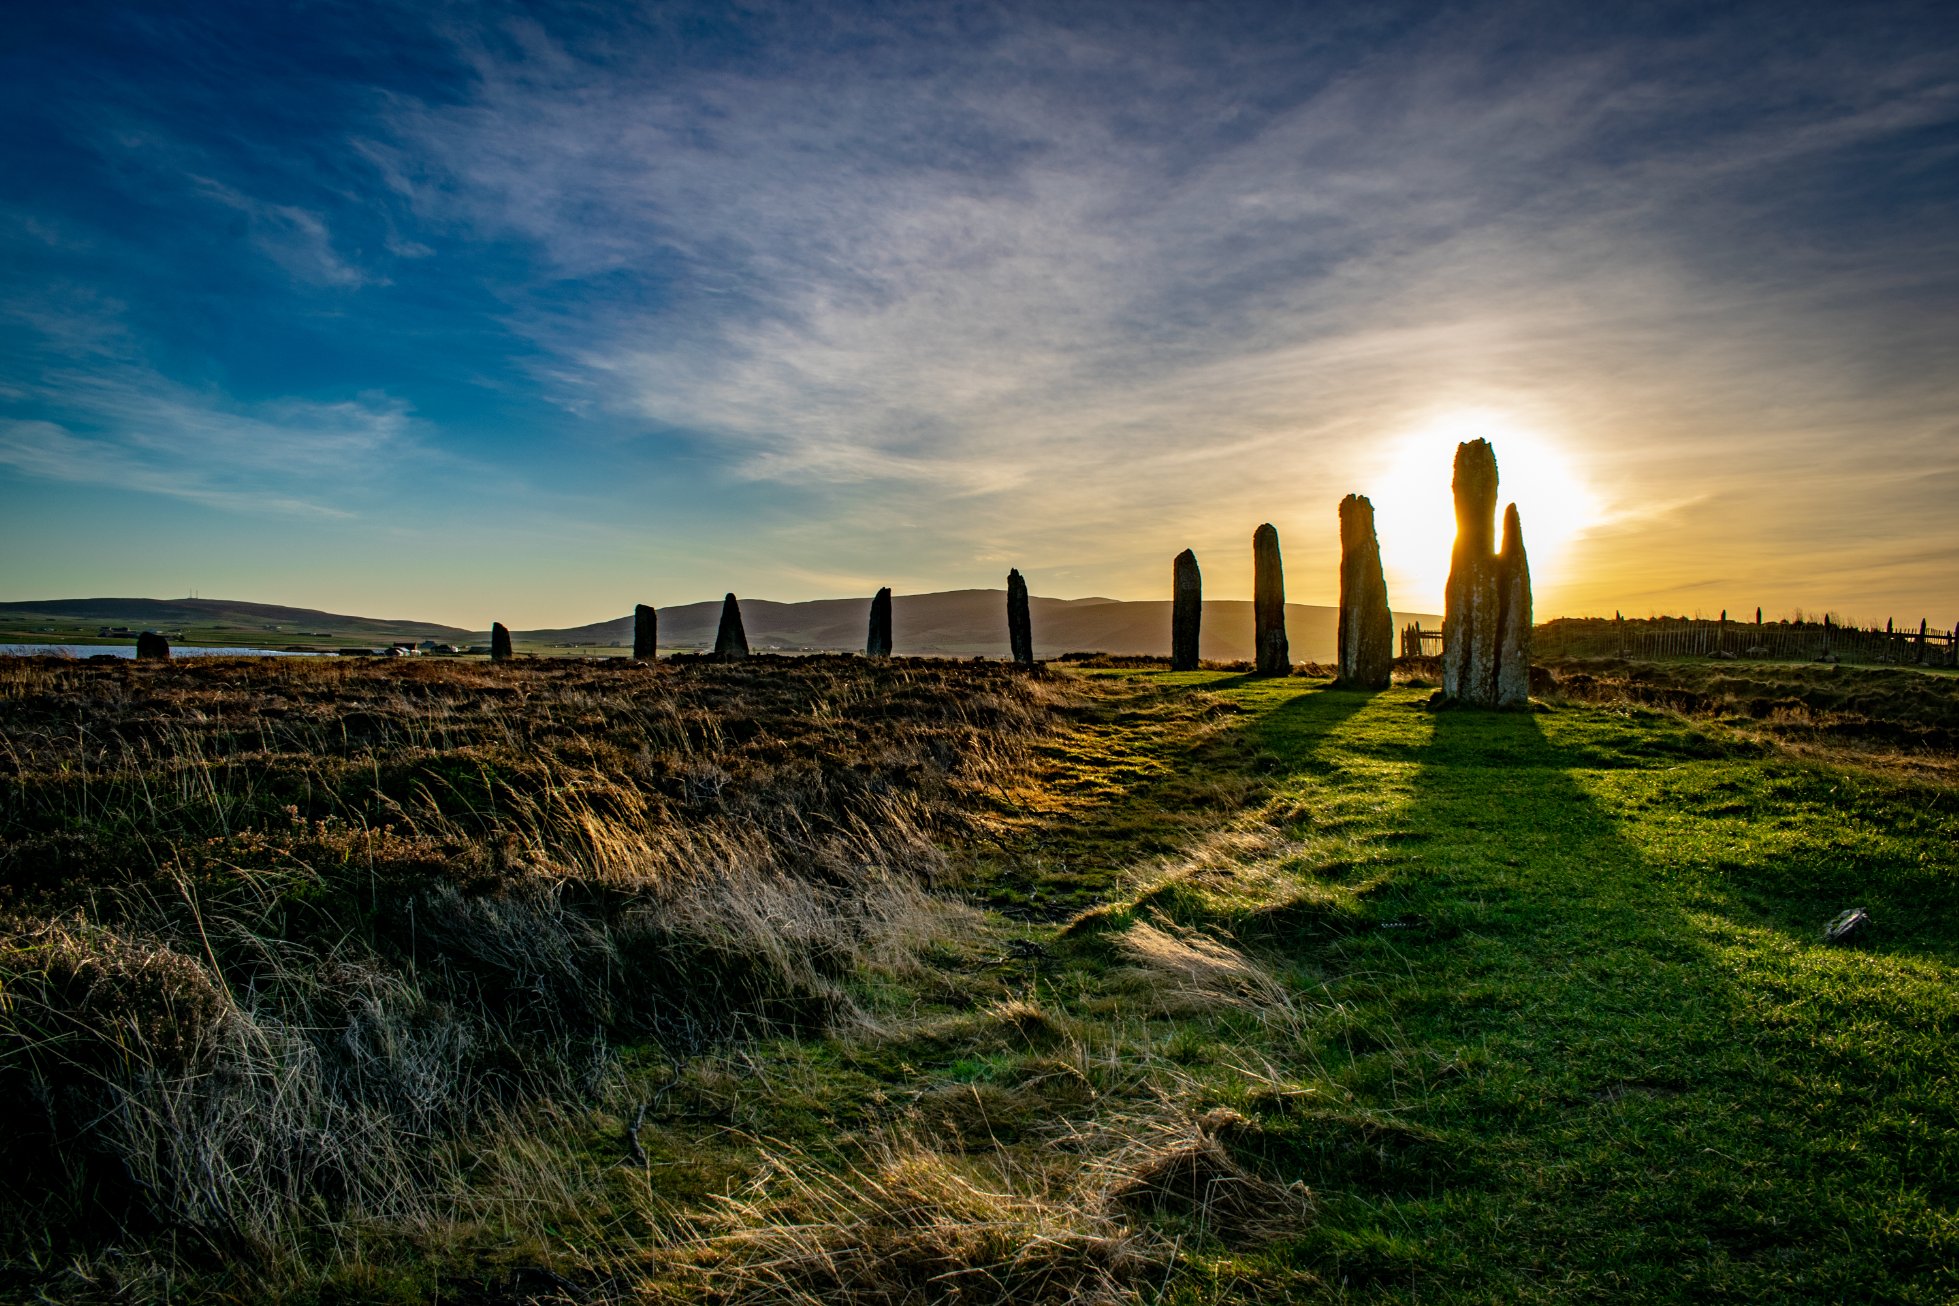 The Ring of Brodgar - image by Robert Towns